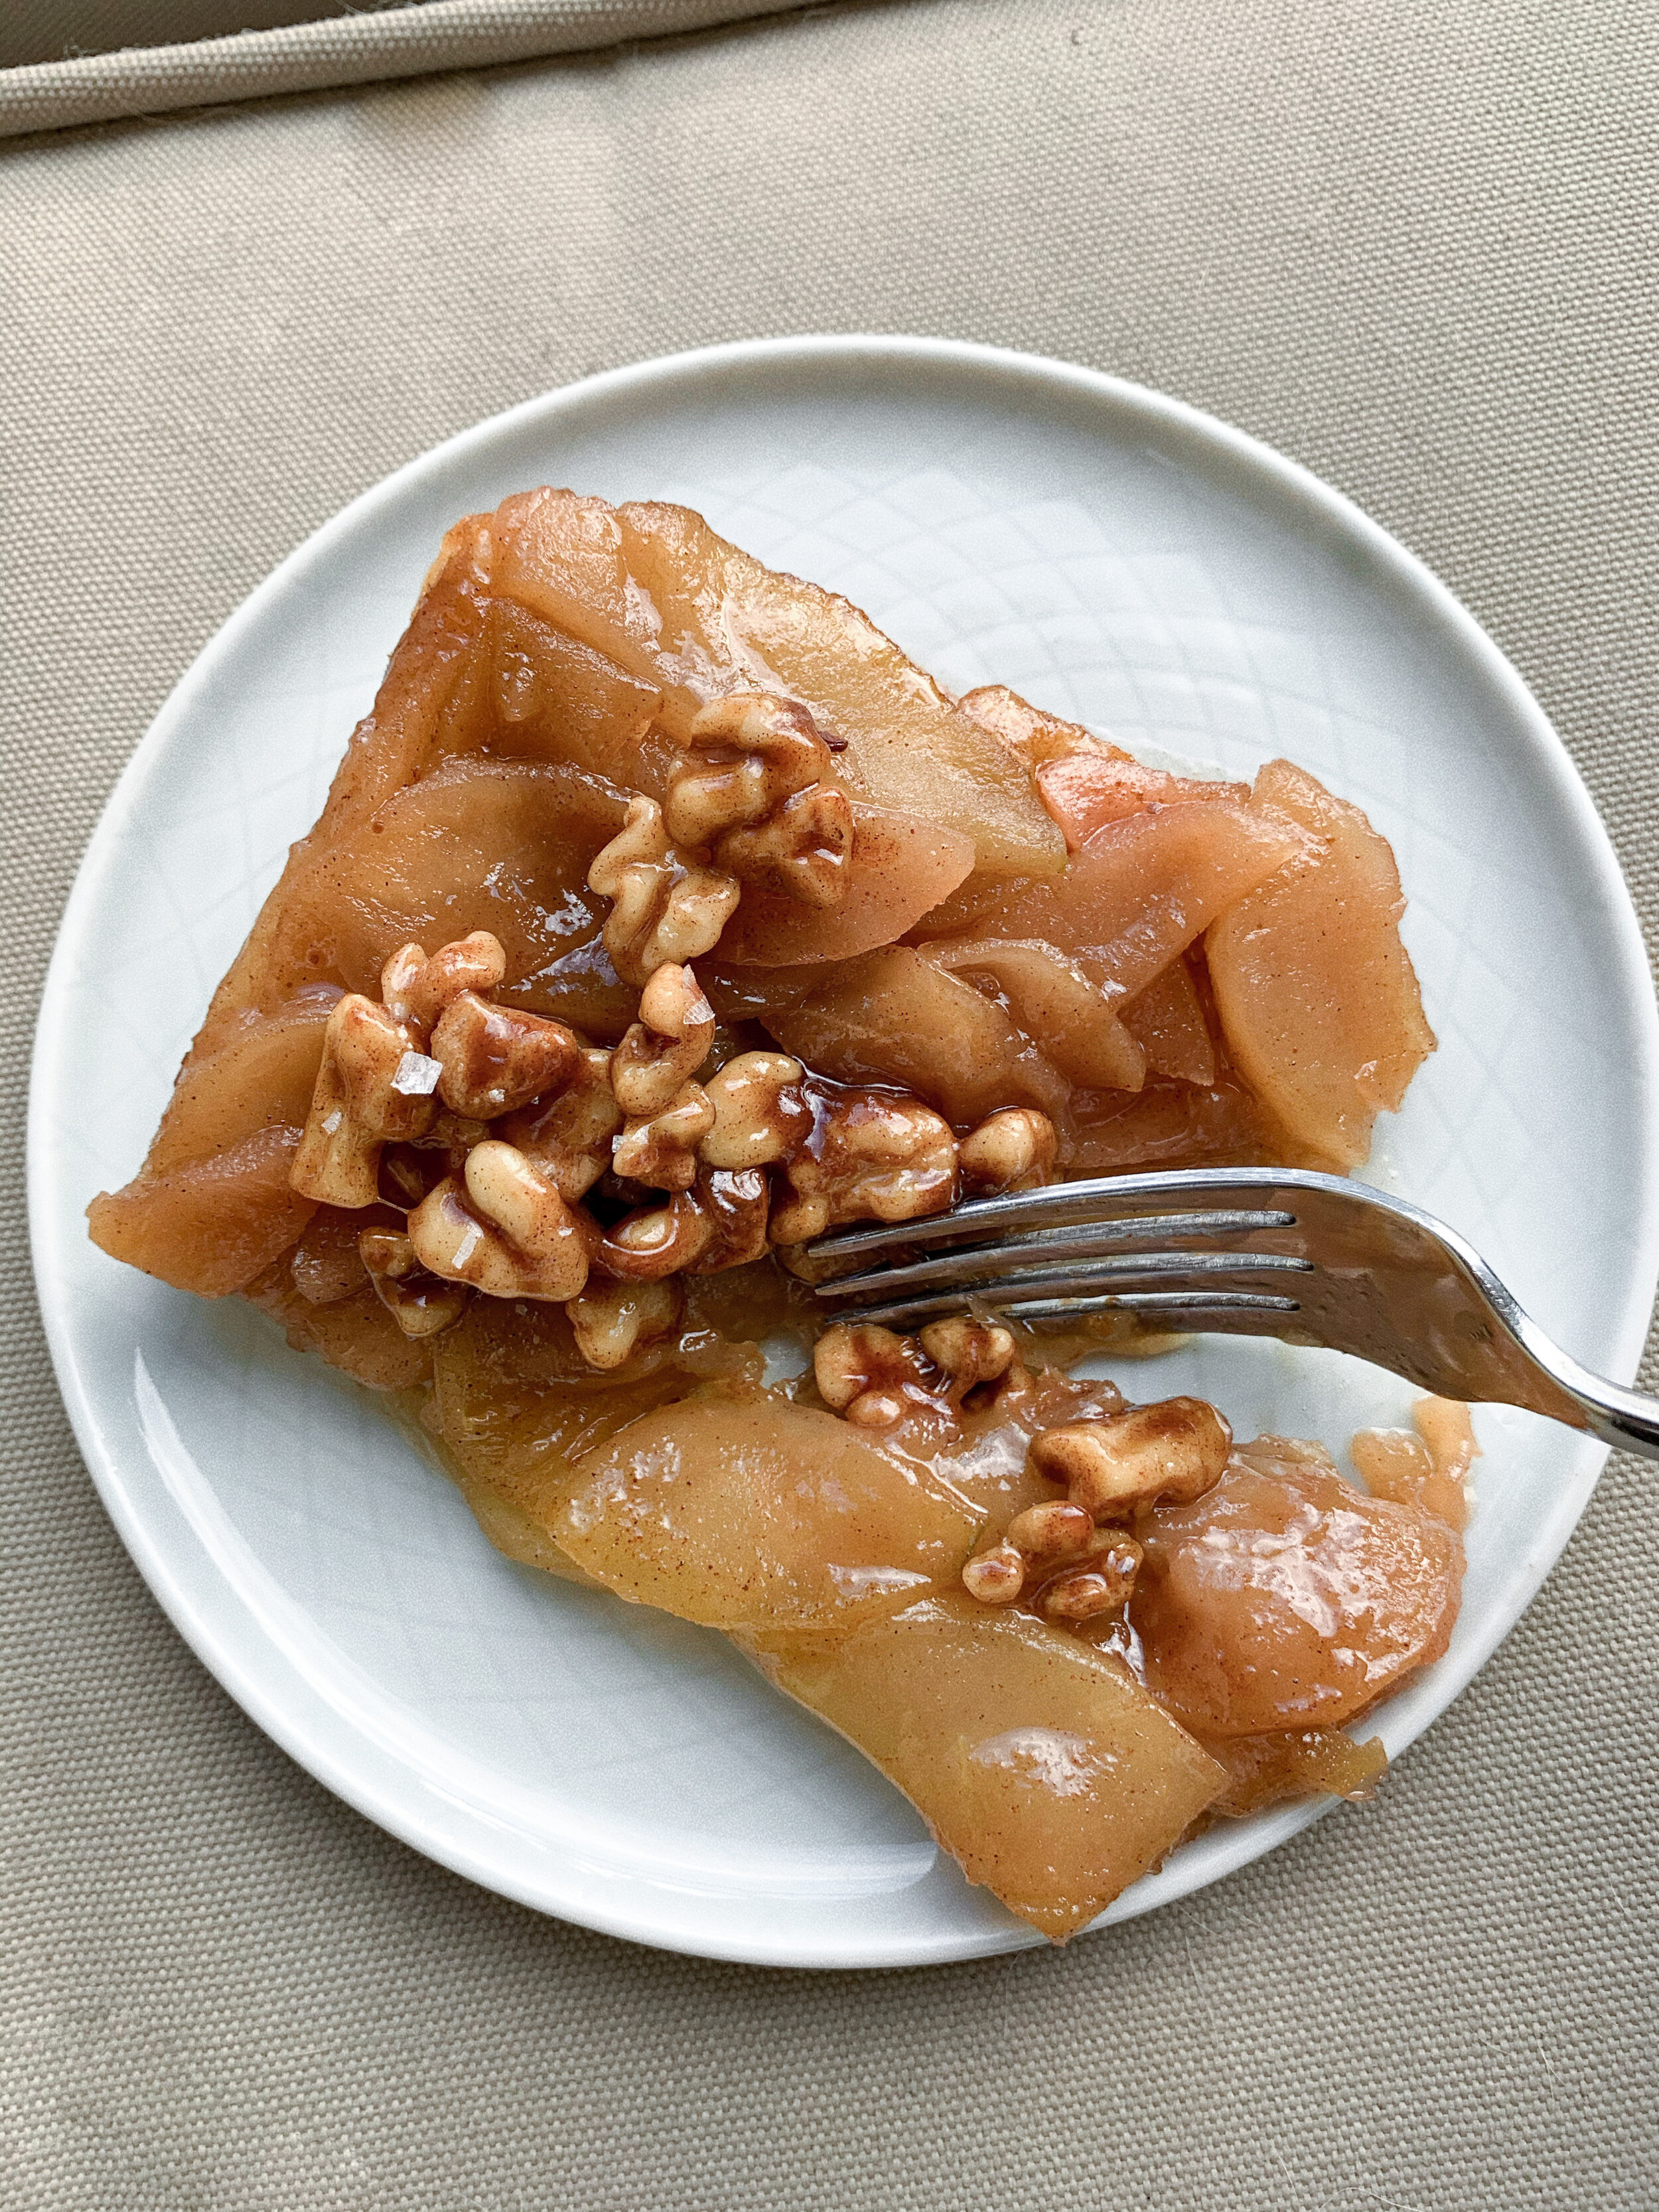 The plated Salted Apple Tarte Tatin with Candied Walnuts